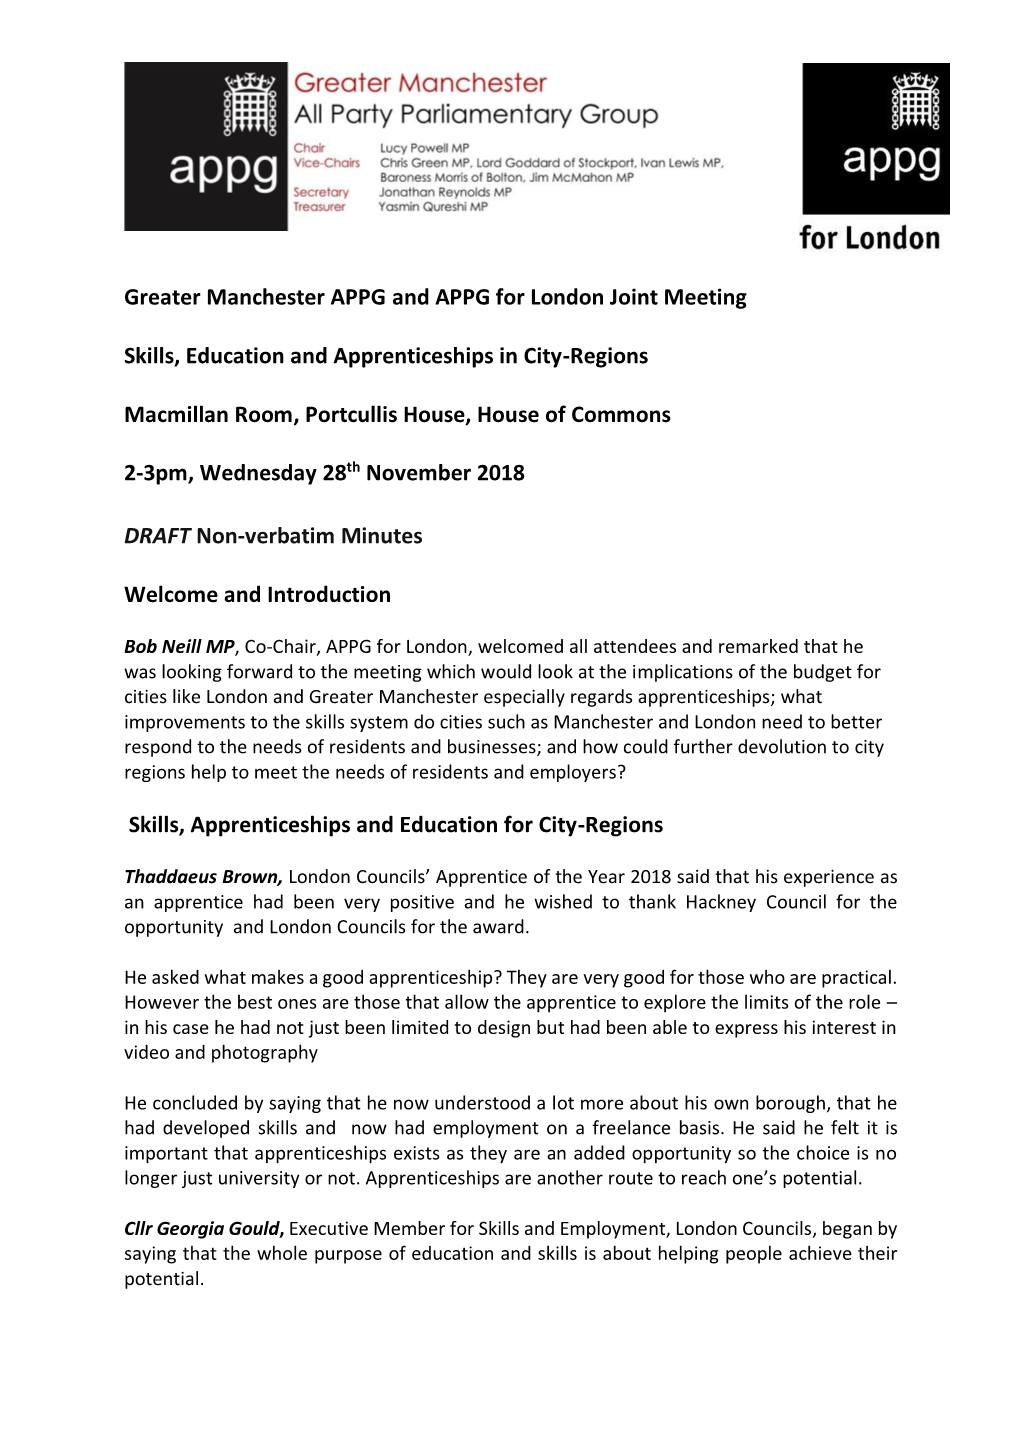 Greater Manchester APPG and APPG for London Joint Meeting Skills, Education And